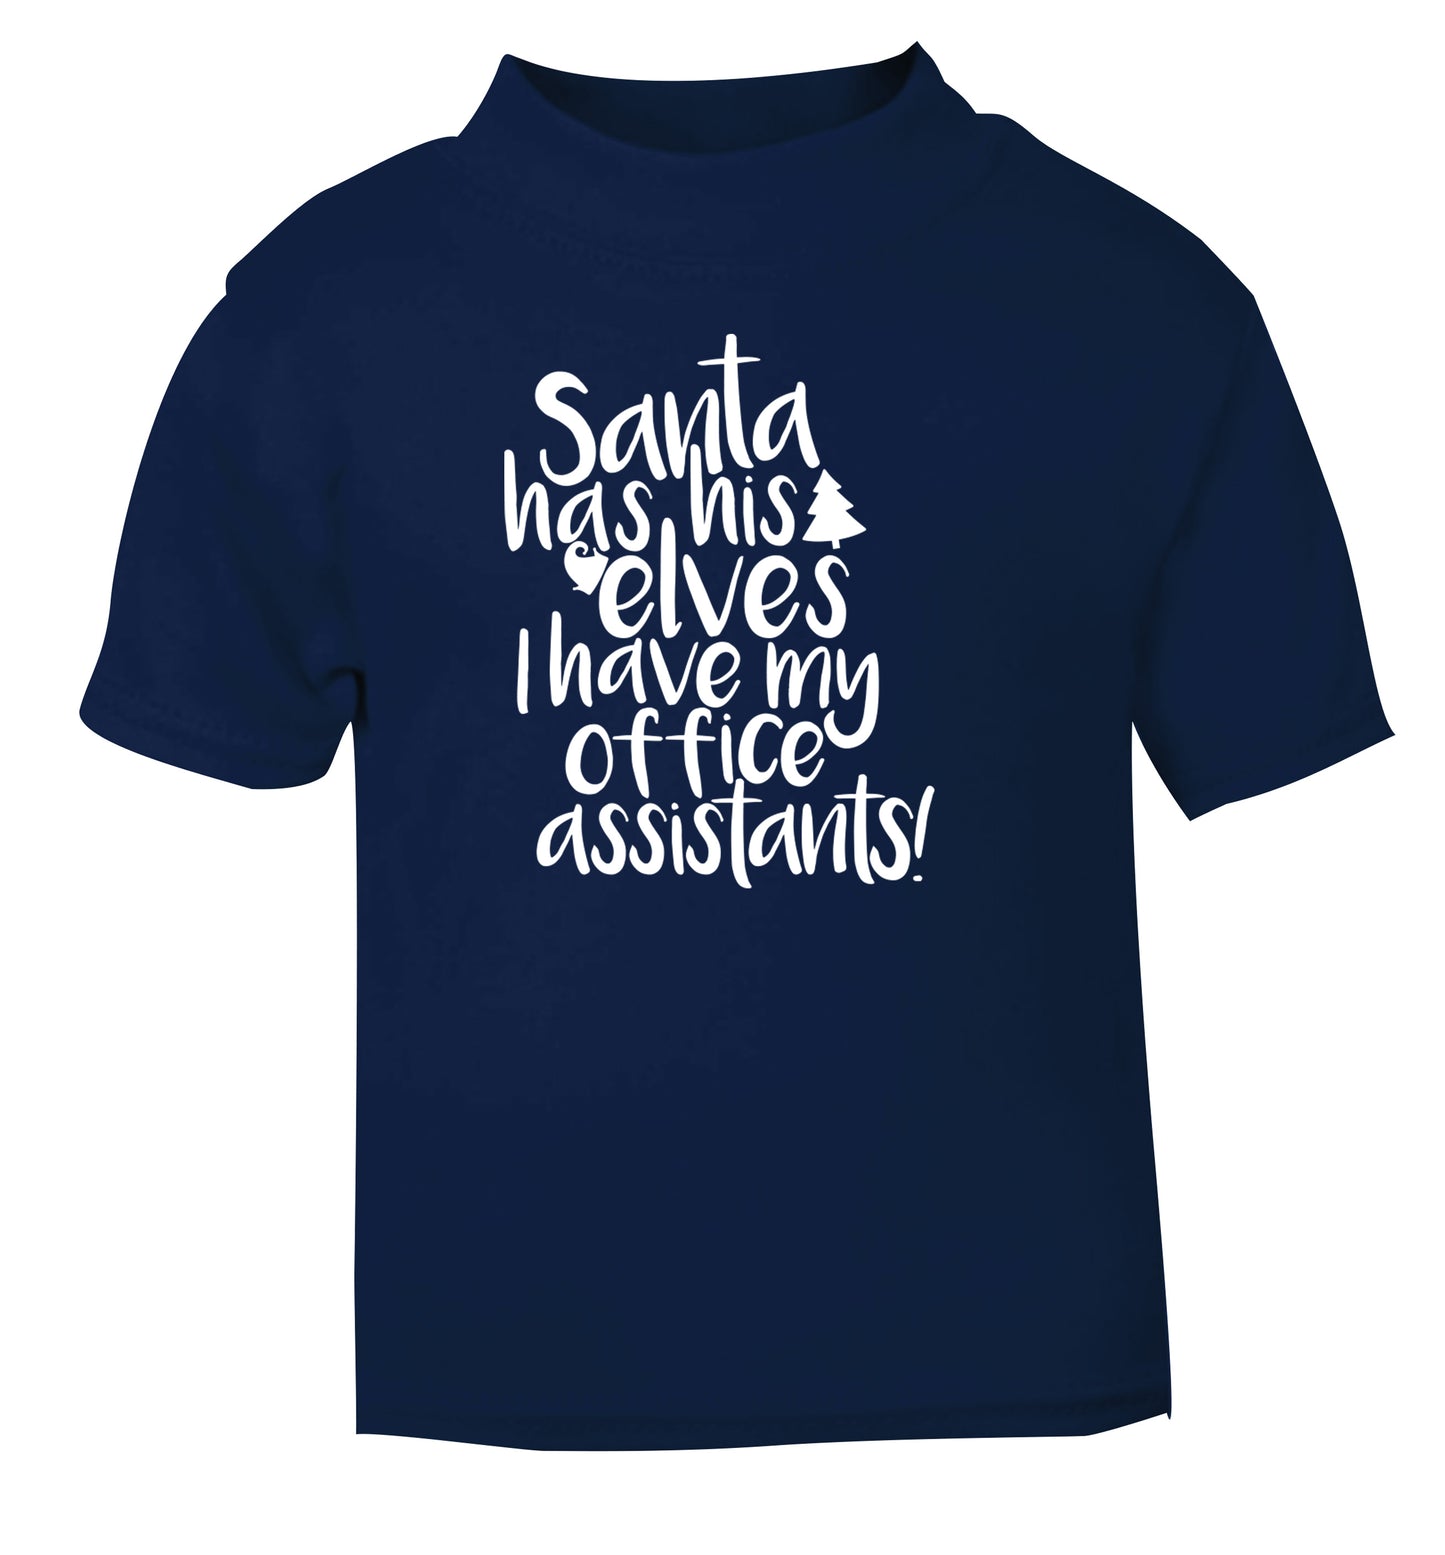 Santa has elves I have office assistants navy Baby Toddler Tshirt 2 Years